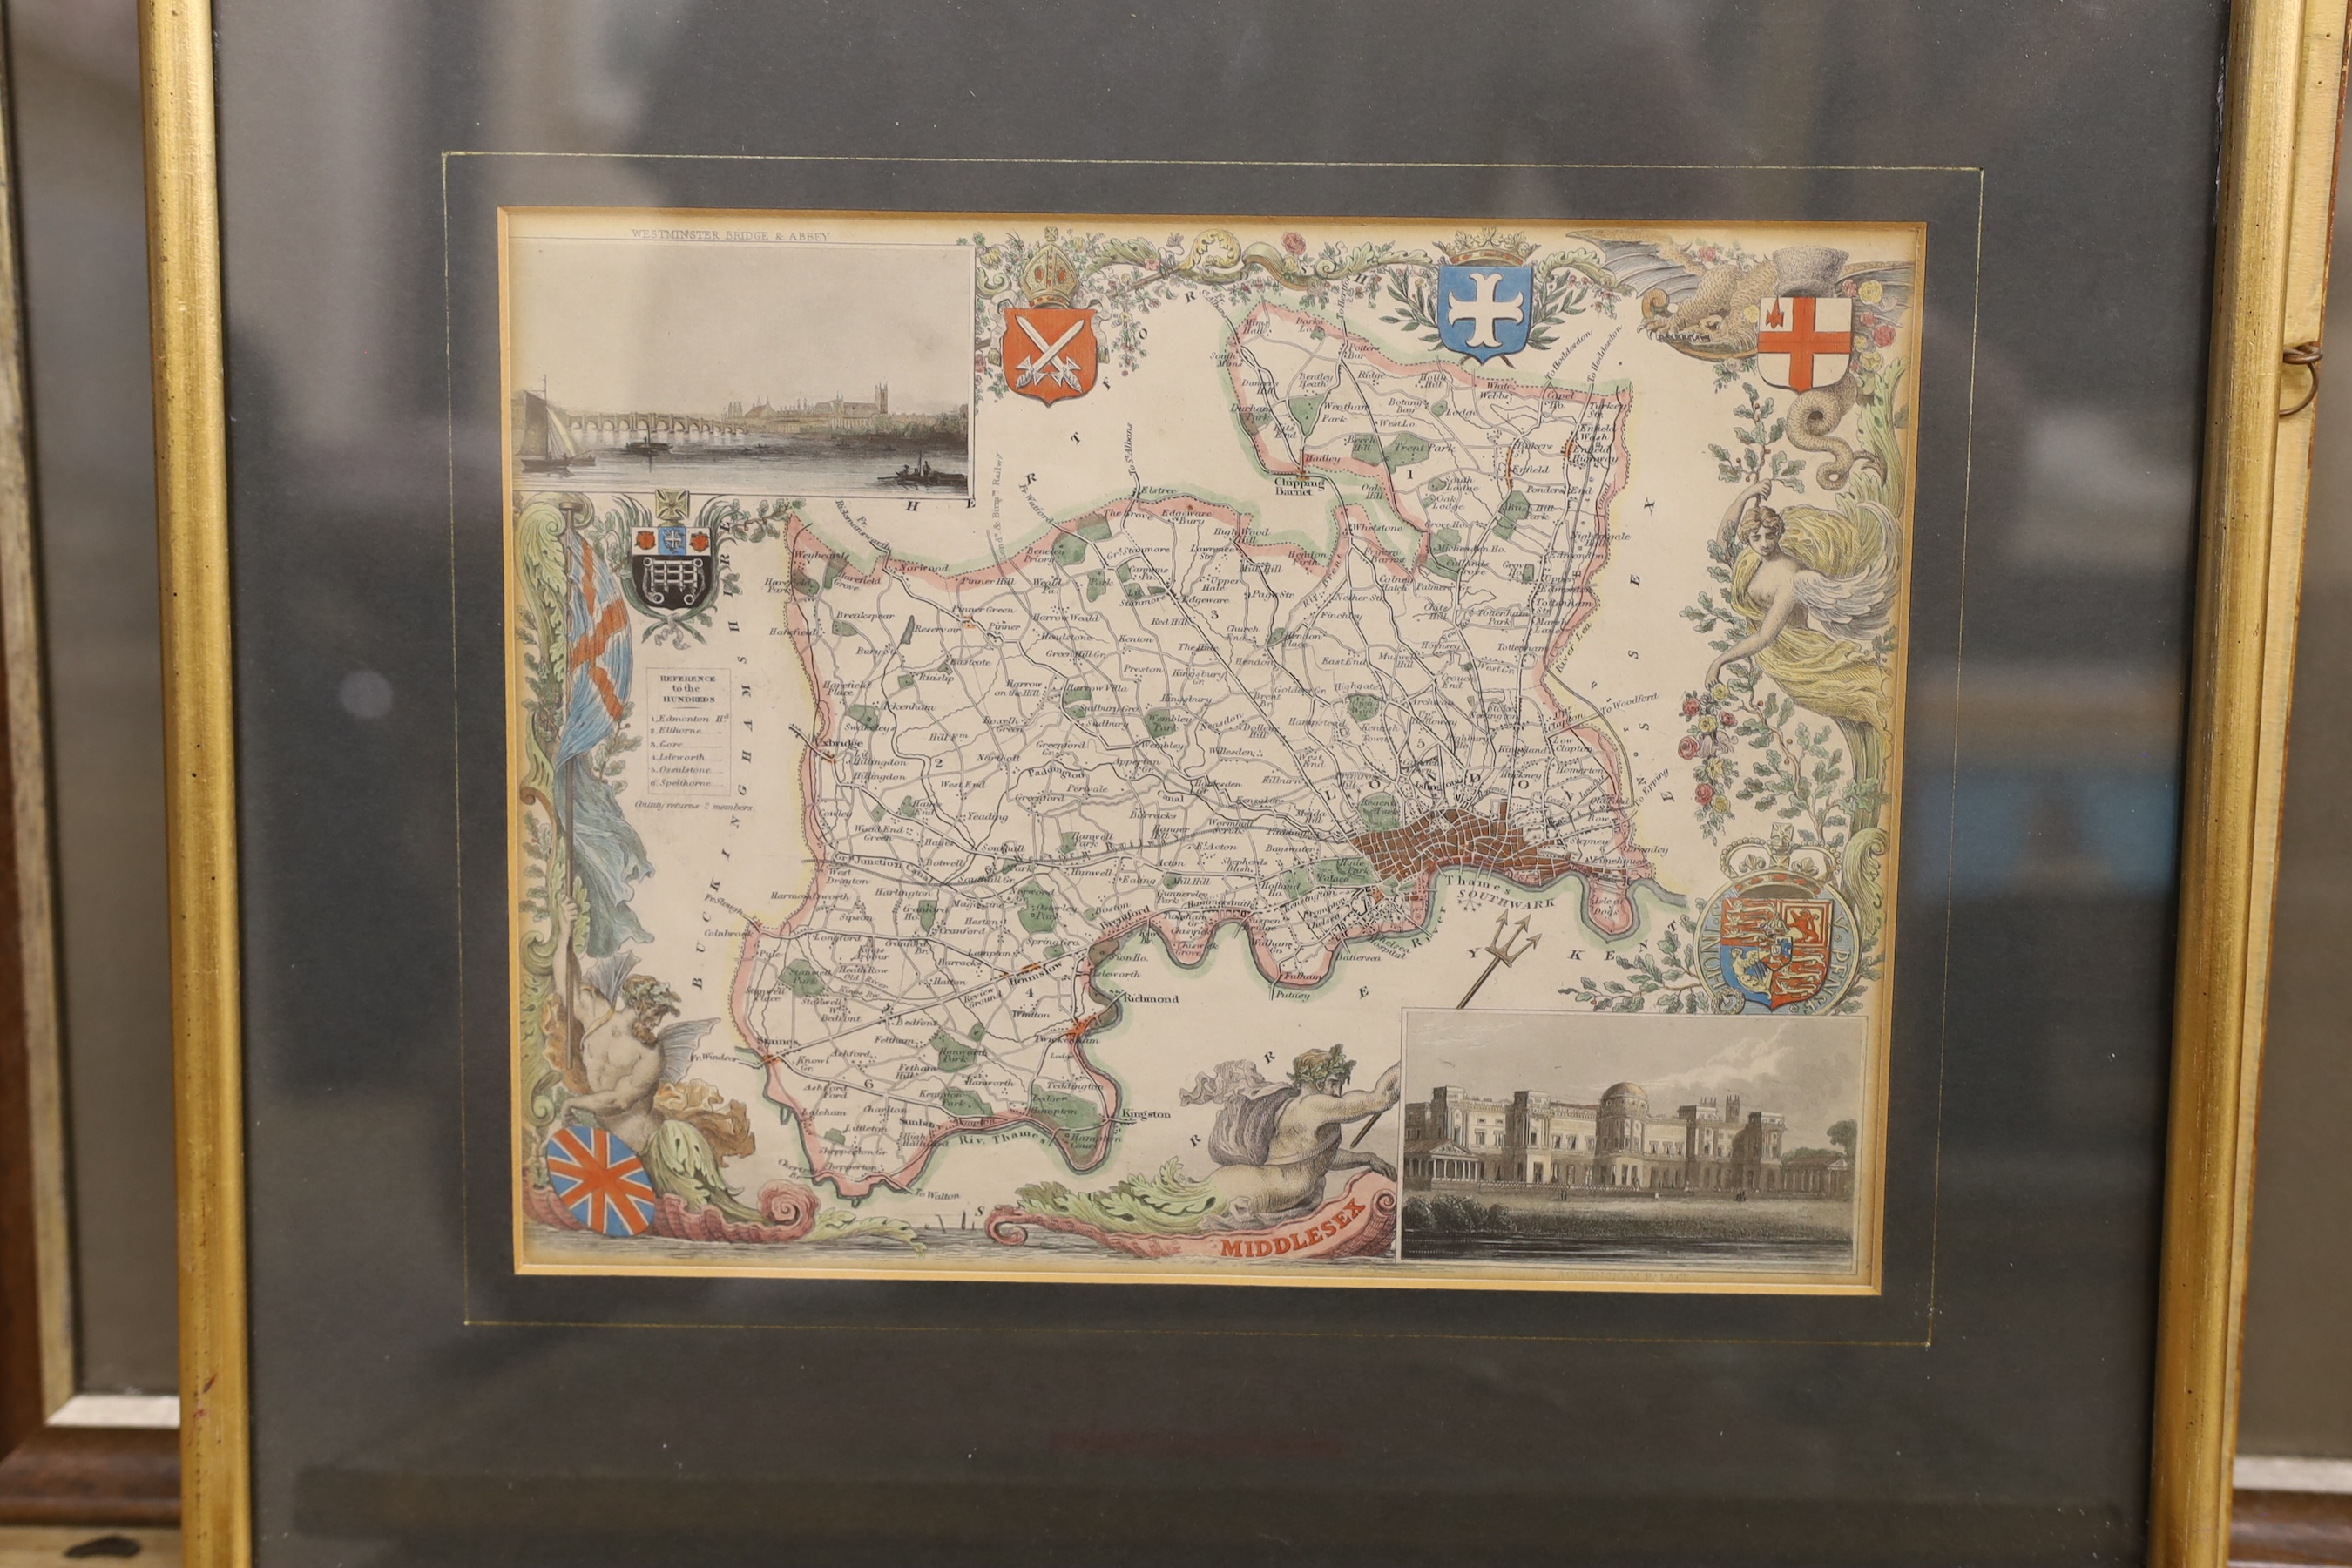 Seven engraved maps - After John Ogilby, The Road from London to Newhaven; The Road from London to Arundel; After Hondius family, an uncoloured map of Provincia La Provence, dated 1621, 38 x 50cm, After Thomas Moule, thr